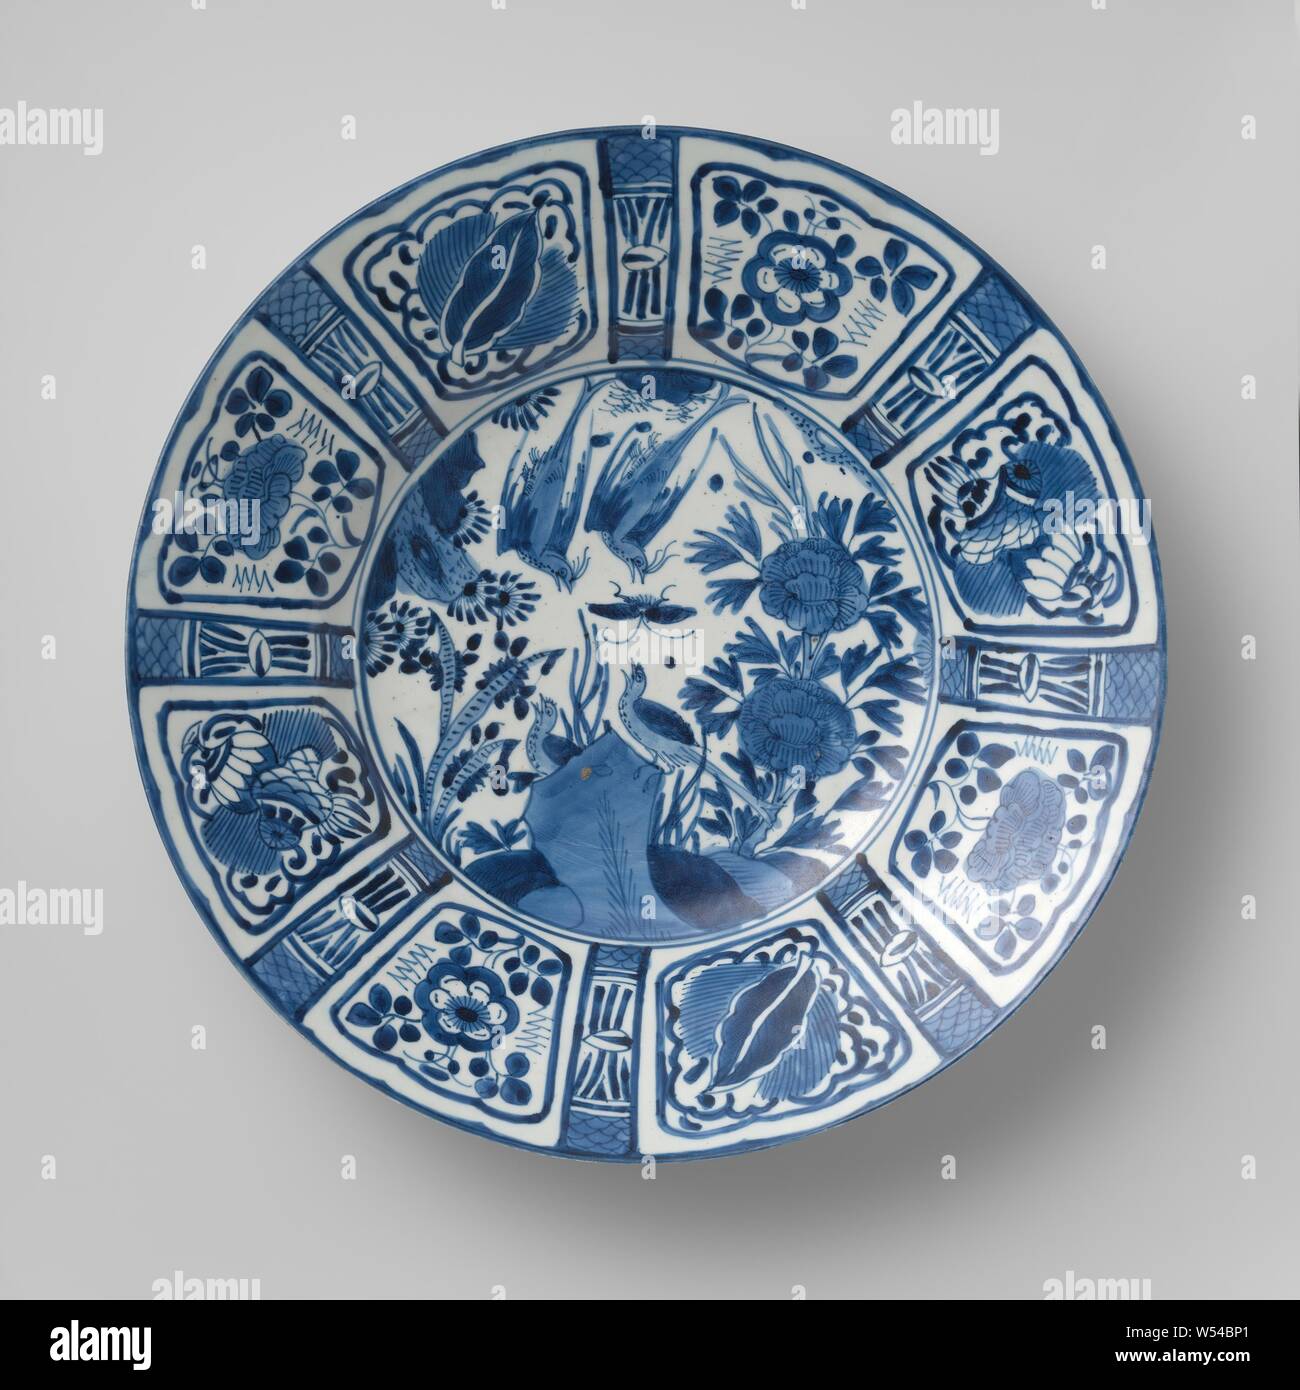 Dish with birds and a butterfly near rocks and flowering plants, Porcelain dish with a wide rim, painted in underglaze blue. On the shelf two flying birds and a butterfly, two more birds on a rock surrounded by flowering plants. The wall and edge is divided into alternately wide and narrow compartments with flower sprays and lucky symbols. The outer wall with three flower sprays. Marked on the bottom with a seal mark. Decoration following the Chinese kraak porcelain. Three proen on the undersides. Blue White., anonymous, Japan, c. 1650 - c. 1700, Edo-period (1600-1868), porcelain (material Stock Photo